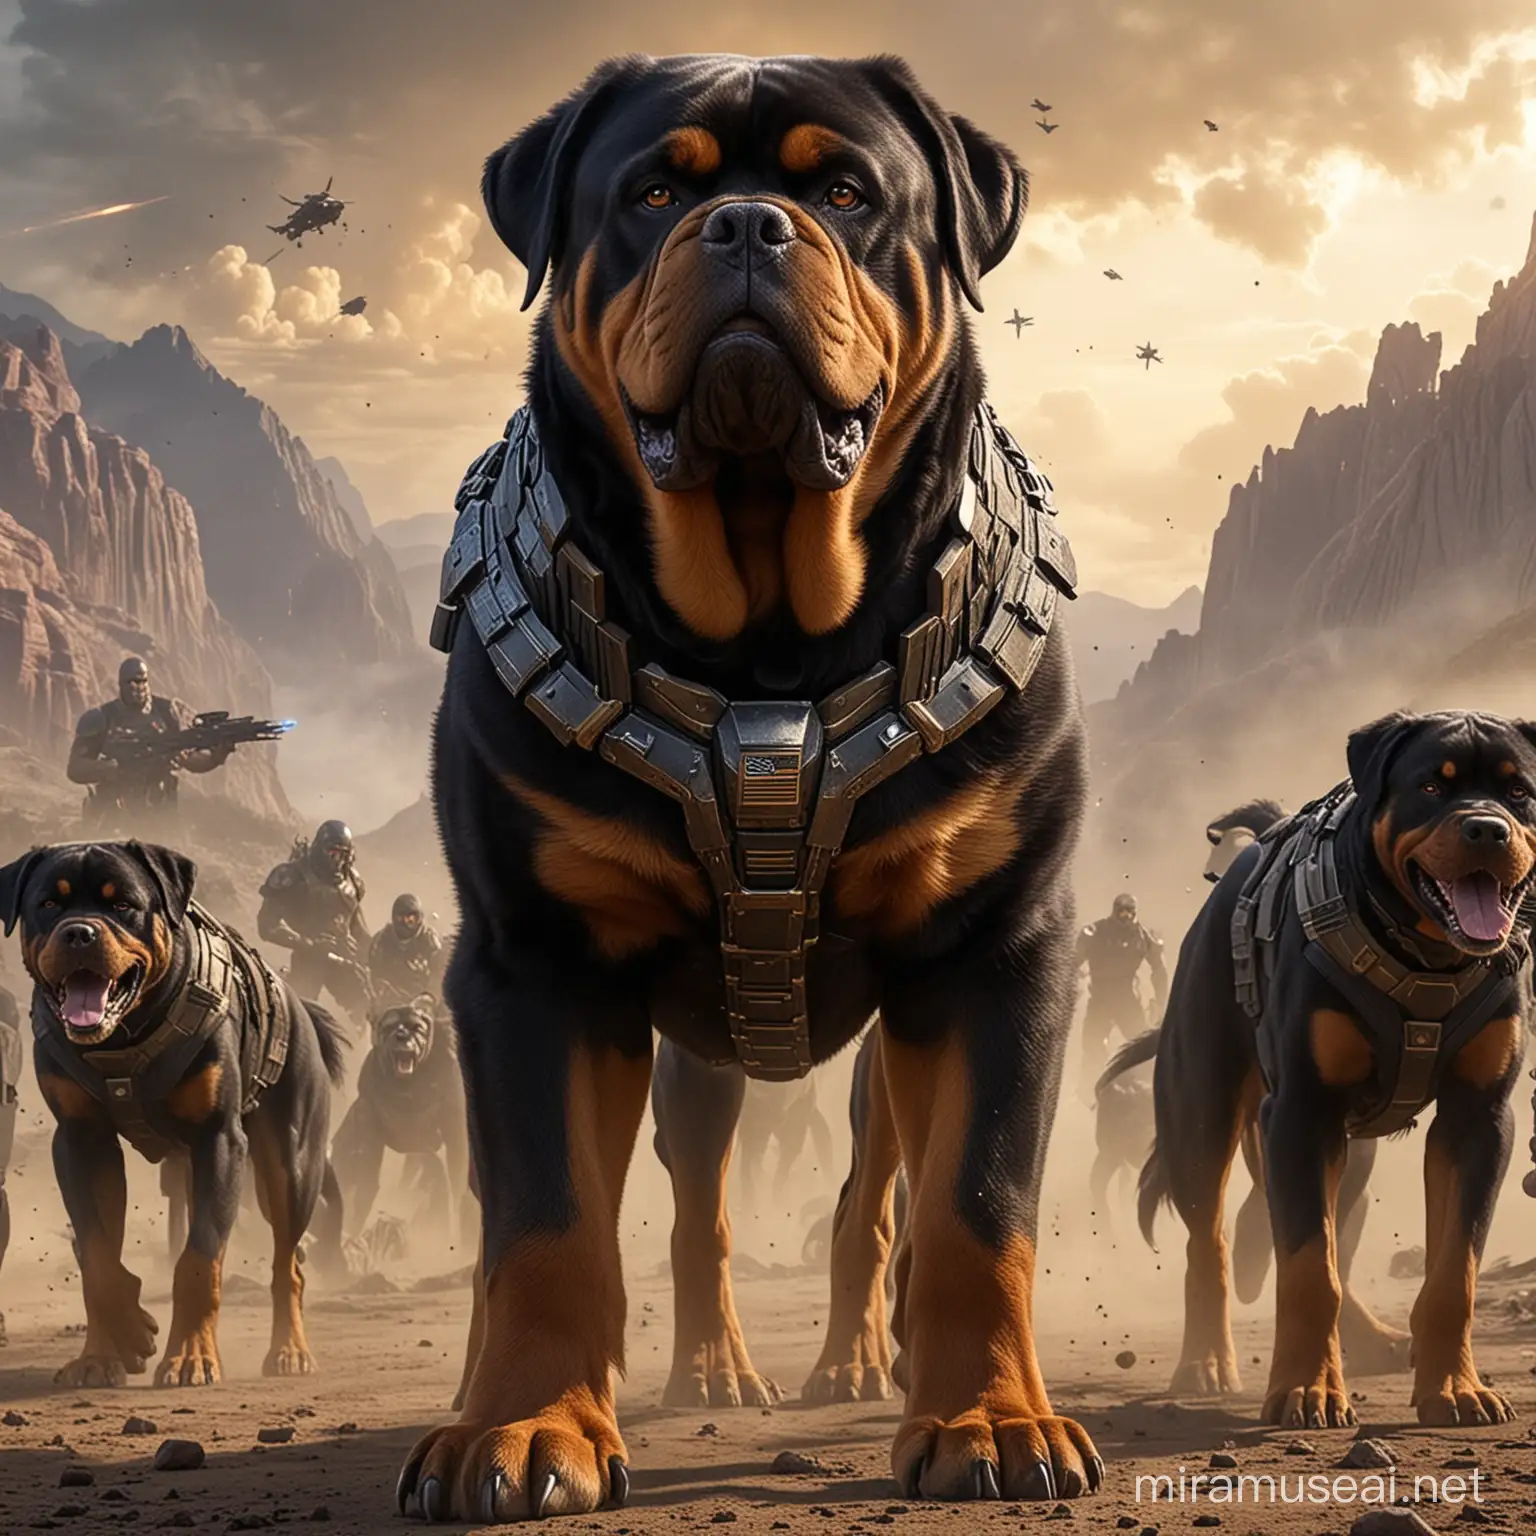 Fierce Thanos Leading his Rotweiler Army on the Planet Titan